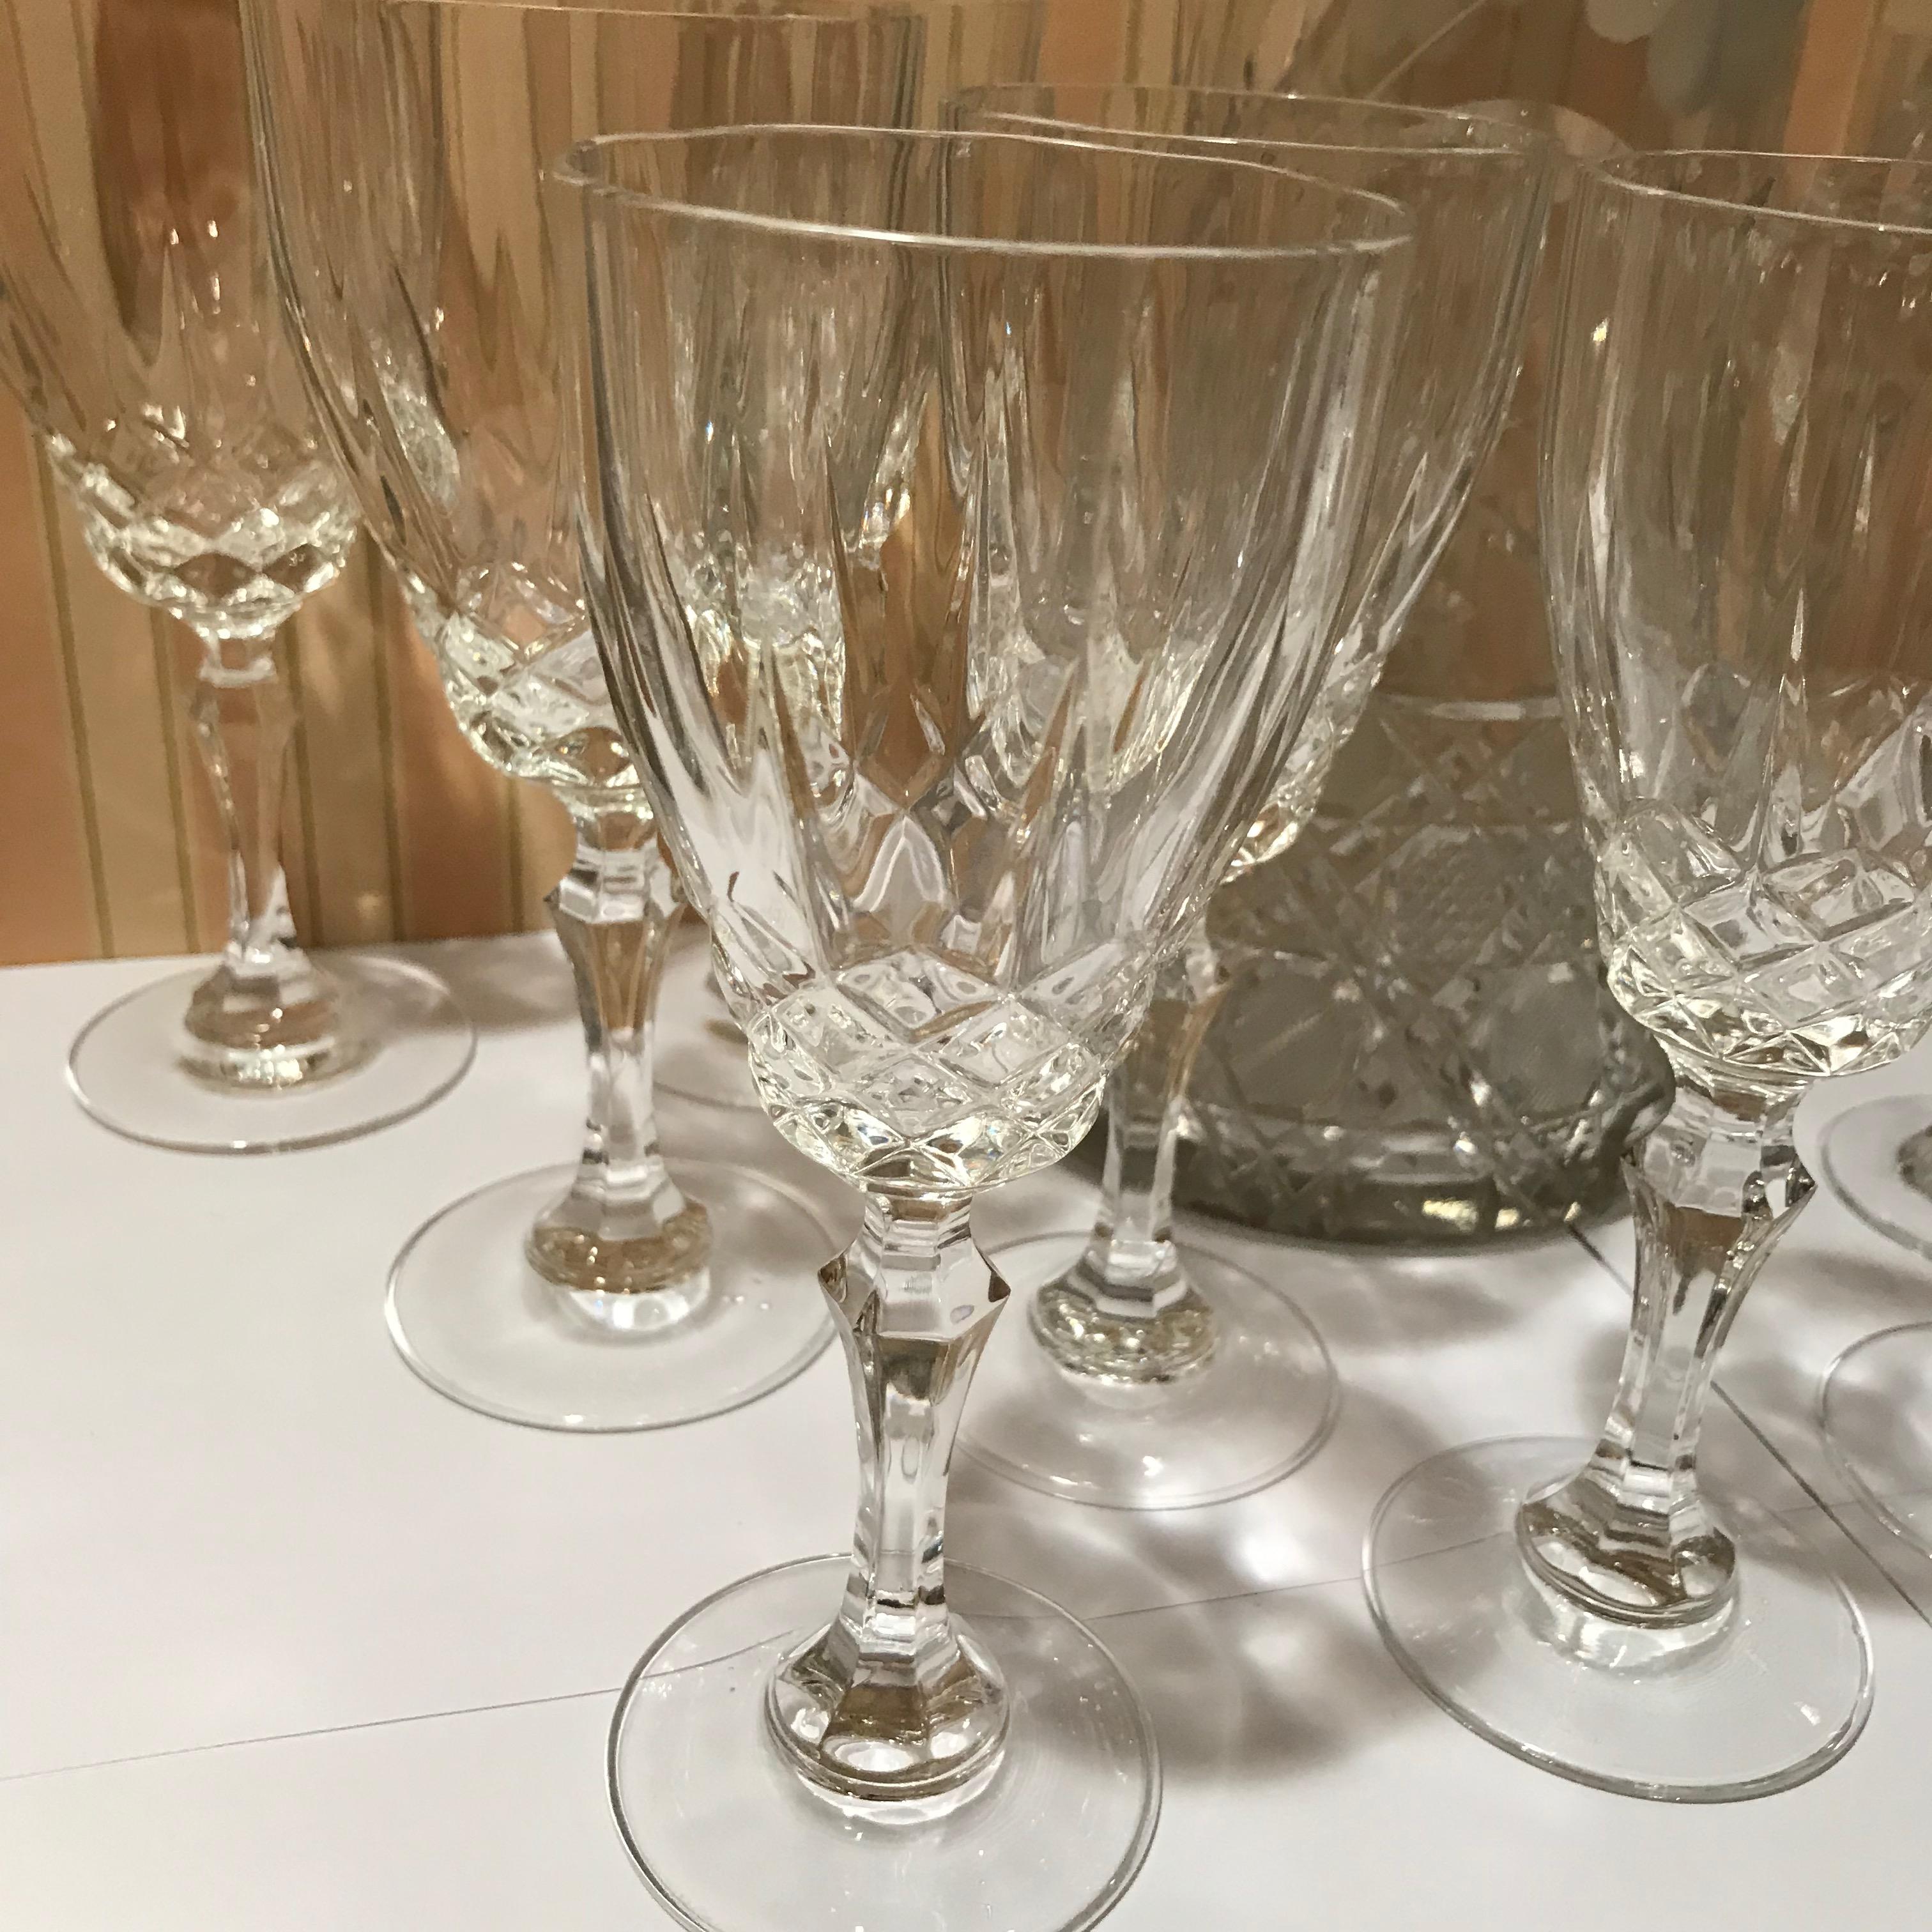 Set of 12 cut crystal stemware, six goblets and six wines along with a cut and etched crystal pitcher, 12